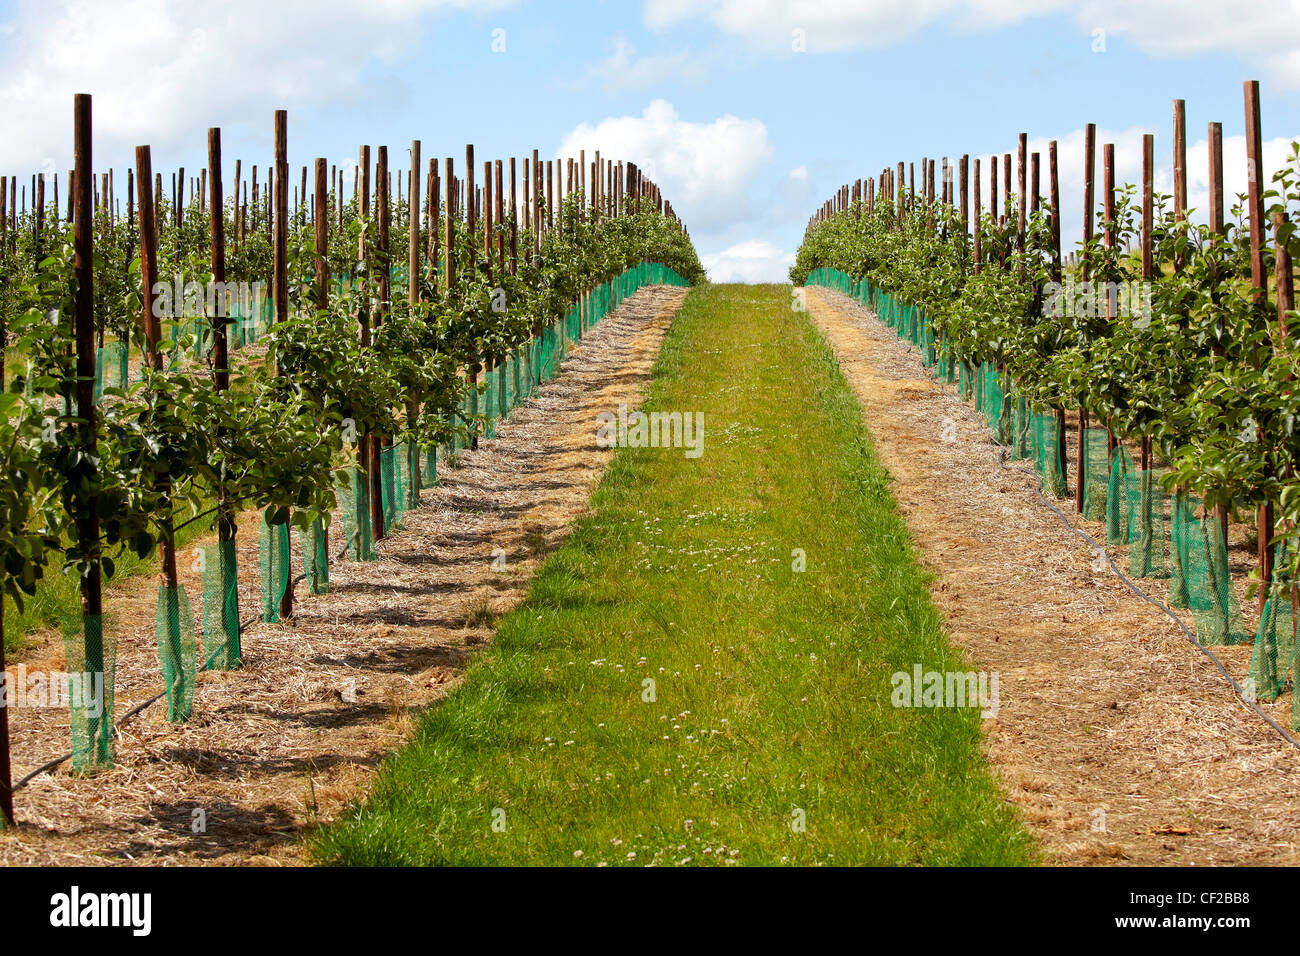 Rows of apple trees in a modern orchard. Stock Photo